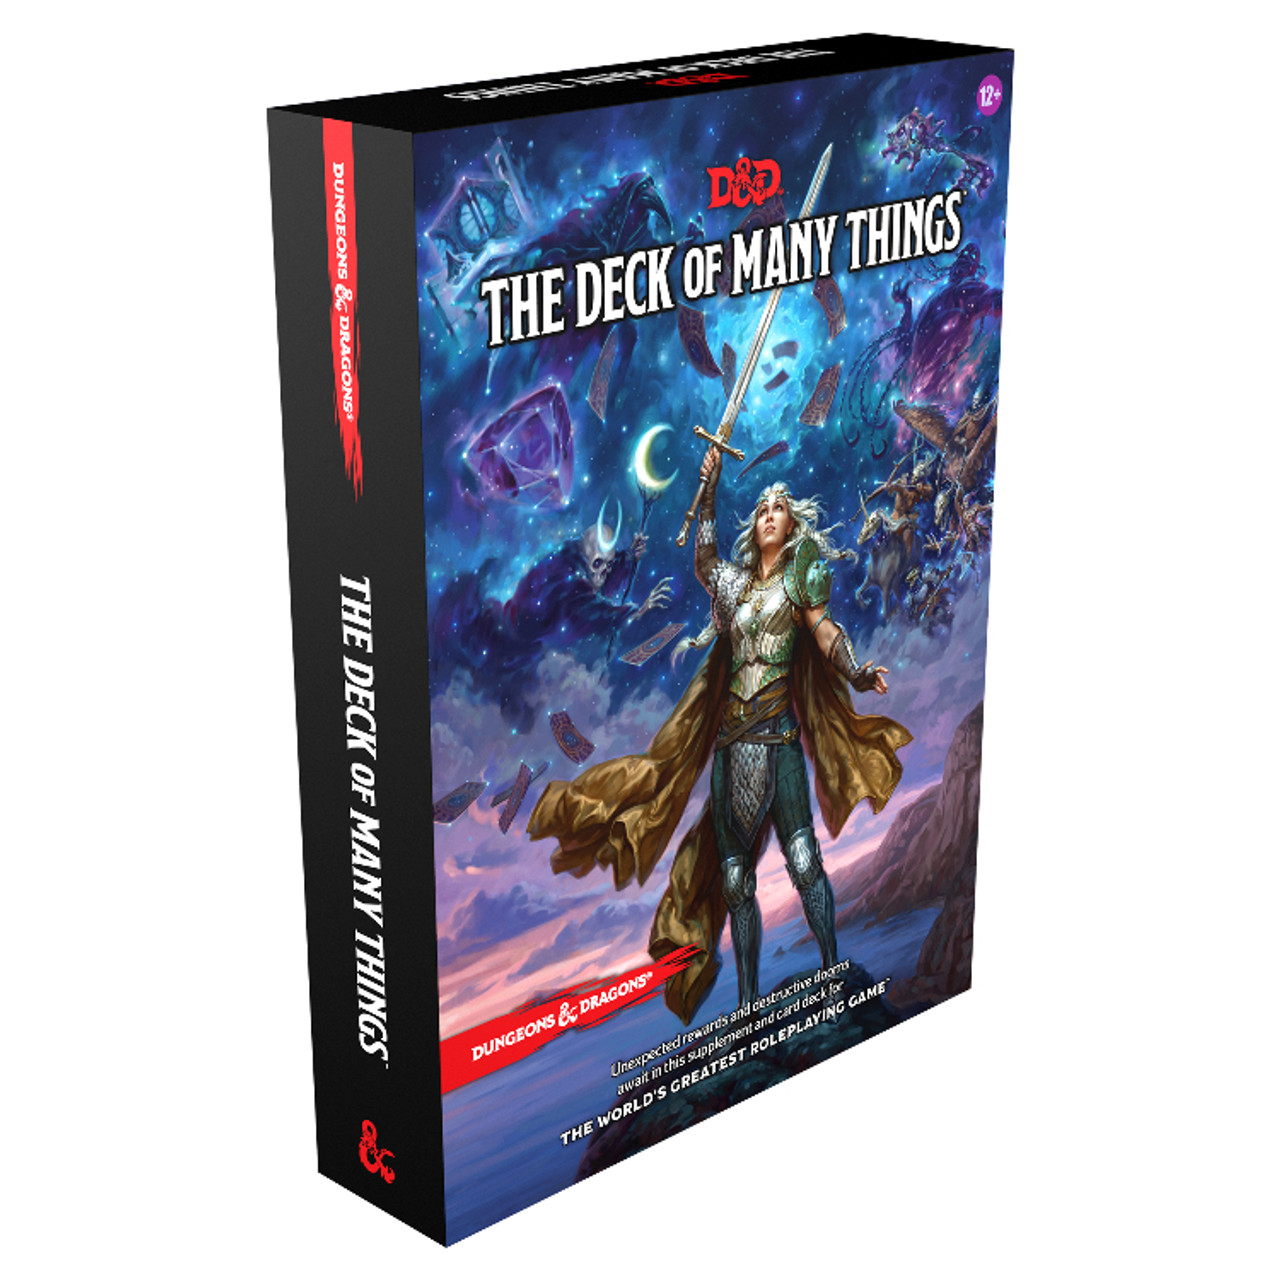 DUNGEONS & DRAGONS: THE DECK/BOOK OF MANY THINGS (Standard Cover) – Ships DELAYED TBD